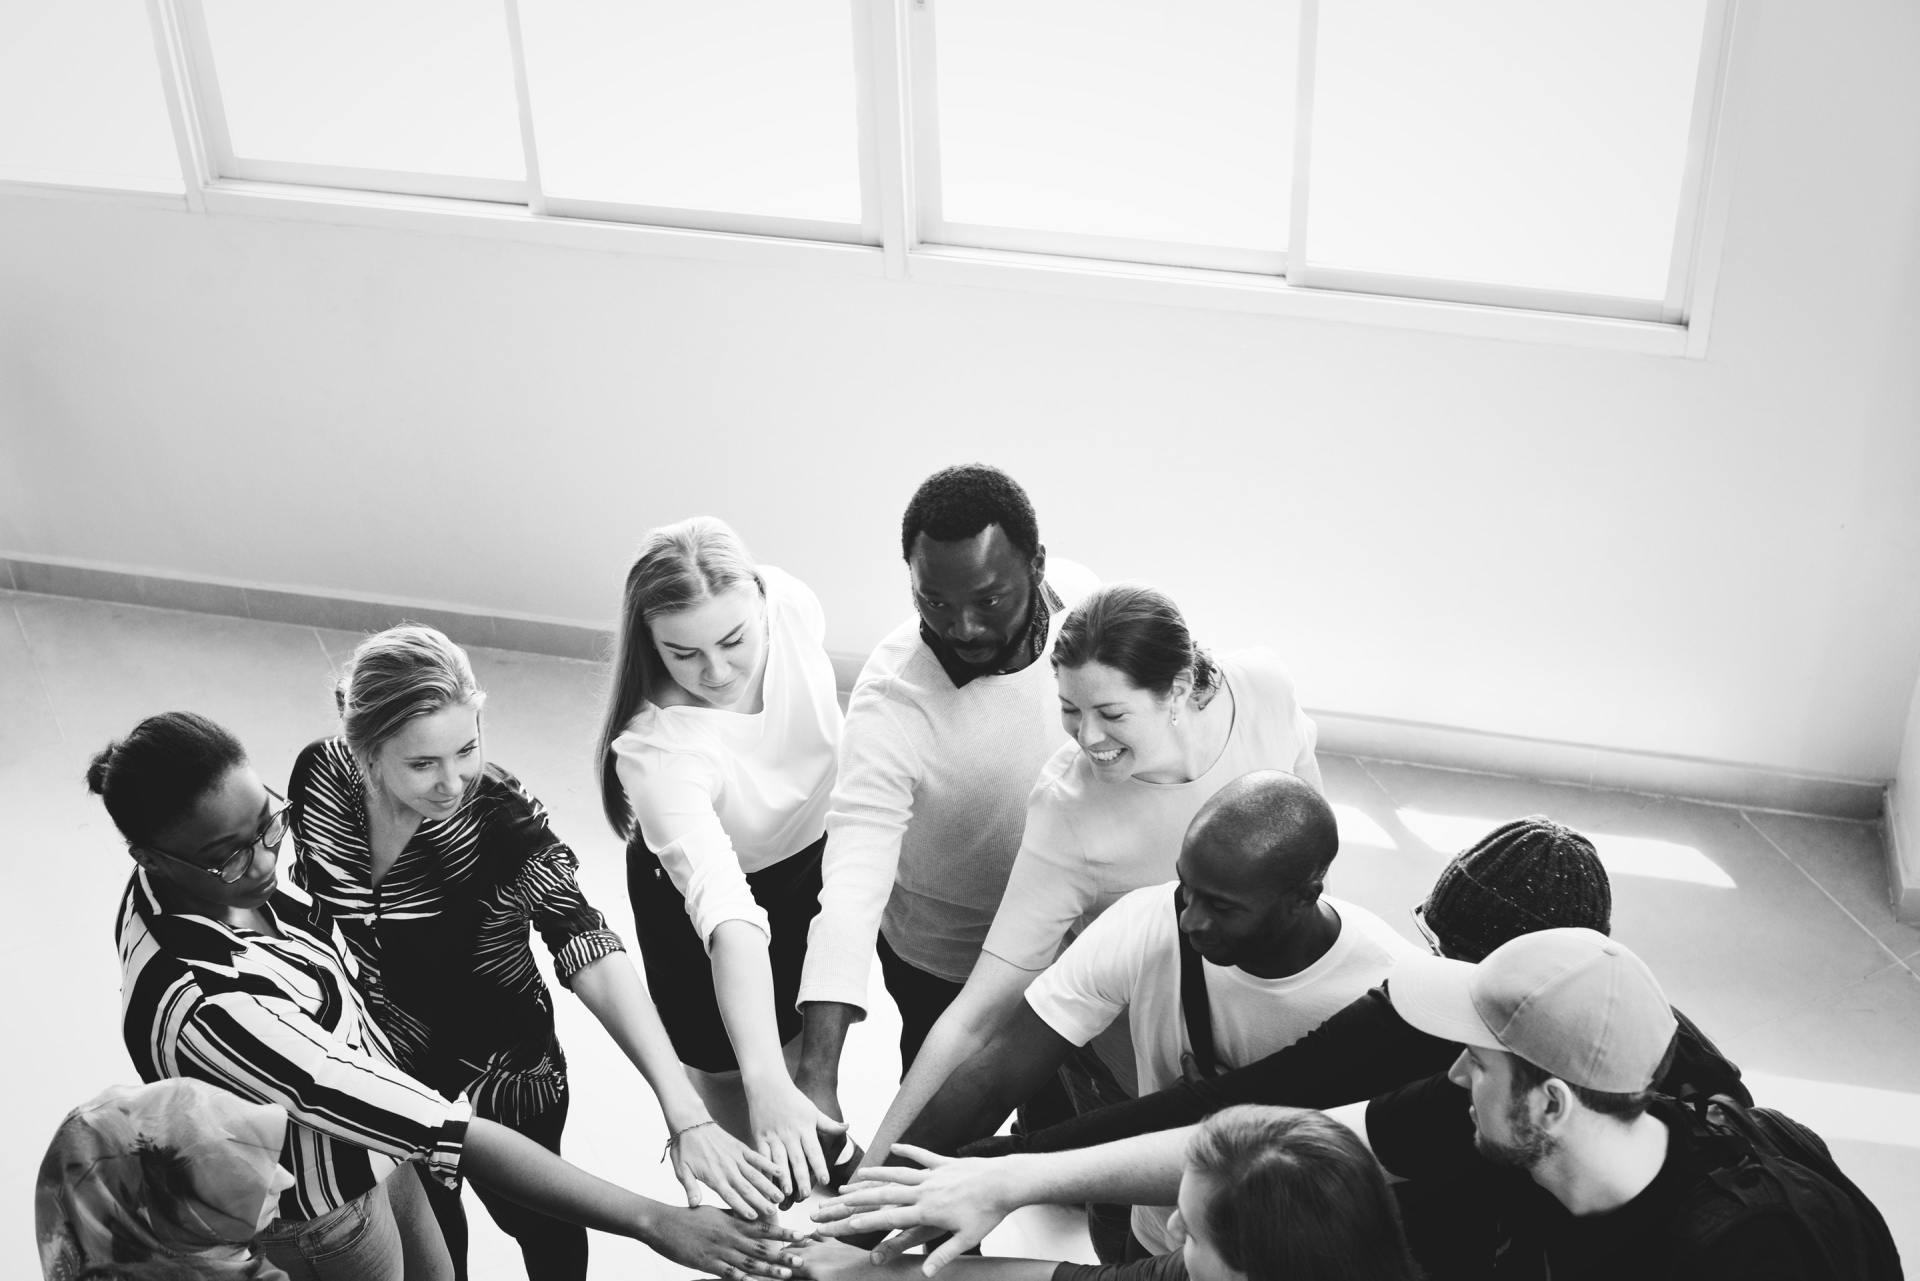 A team of people in a circle with hands in the center. Join Optimal Home Care and become a part of a team that makes a difference.